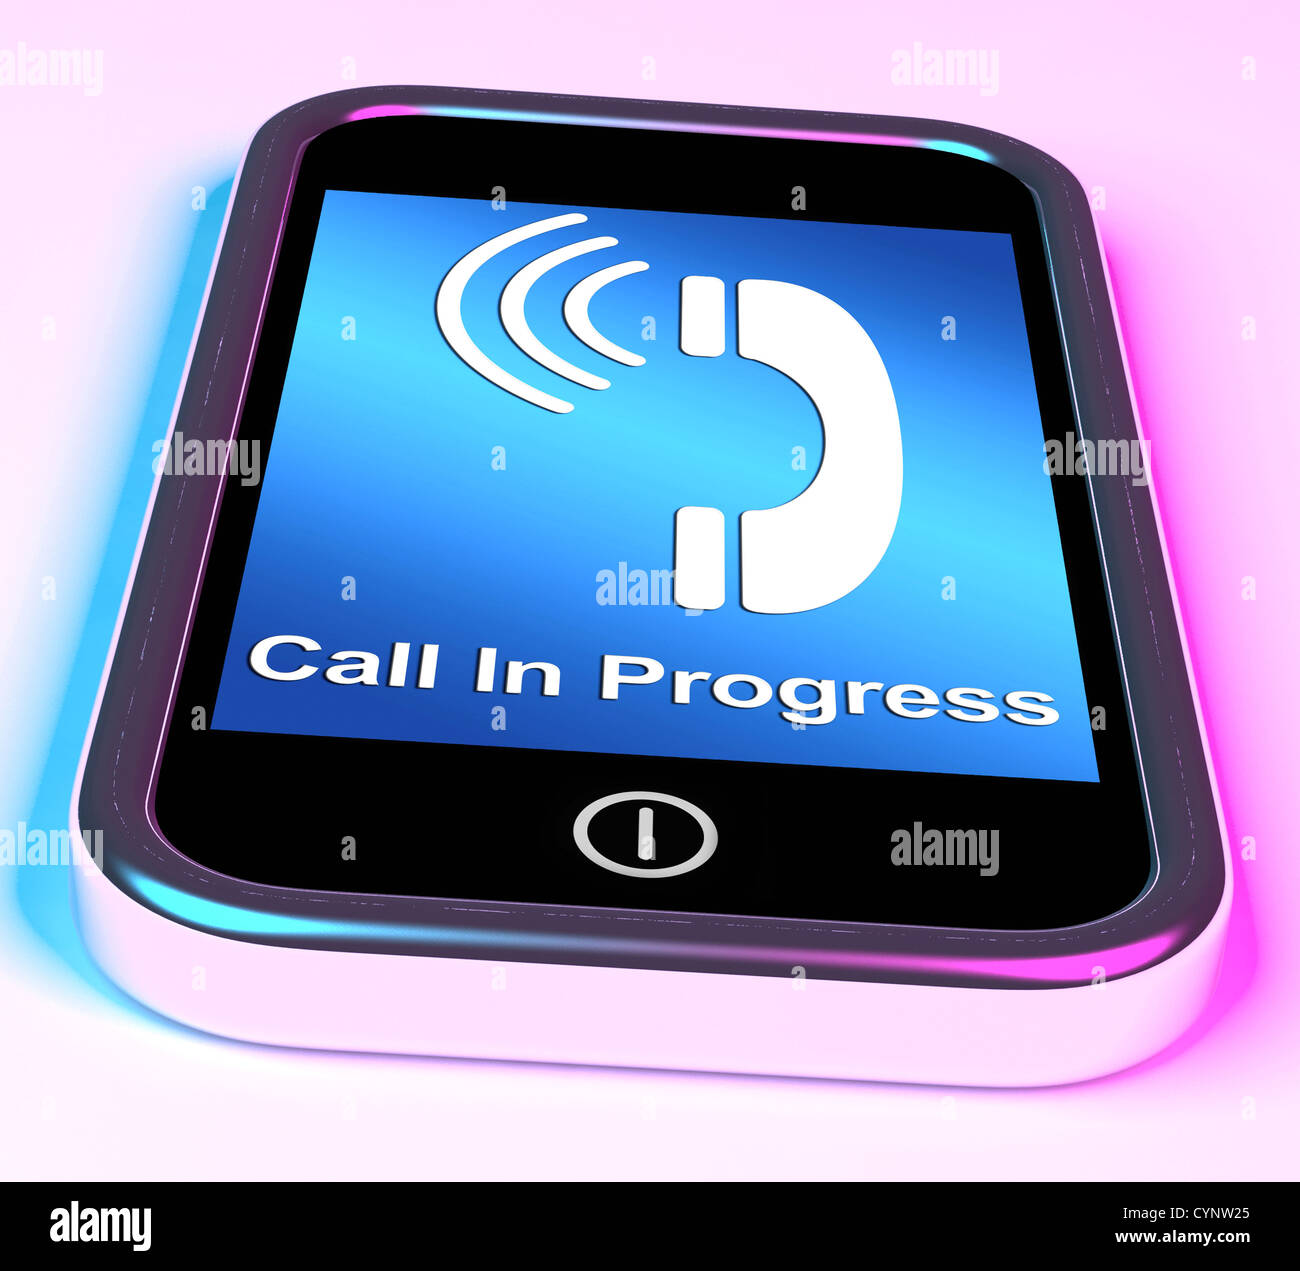 Call In Progress Picture On A Mobile Smartphone Stock Photo